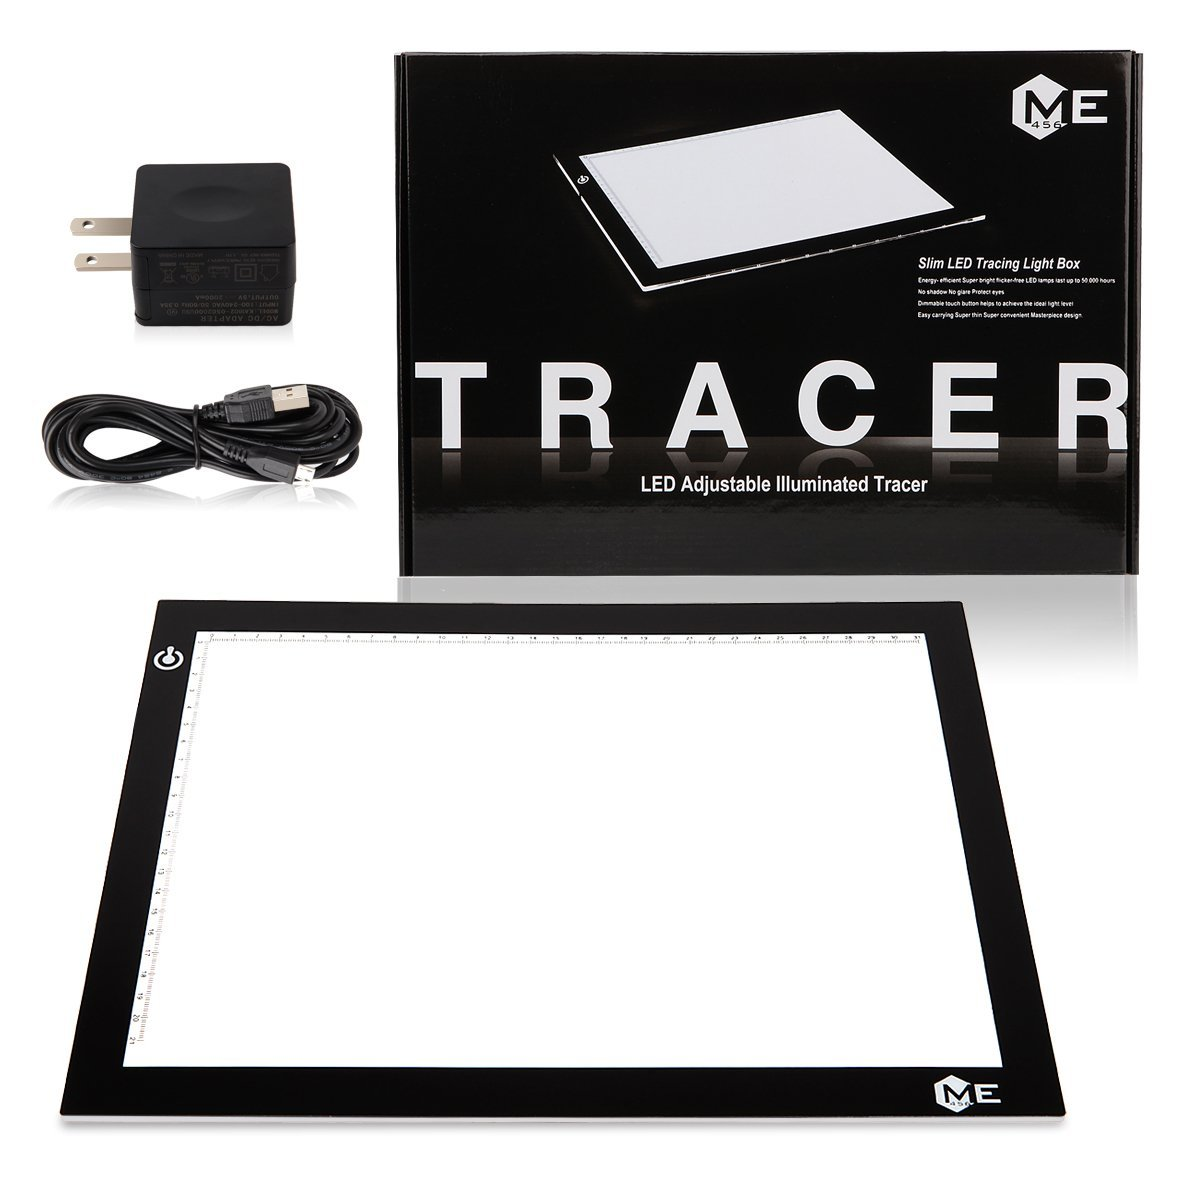 LED Light Pad (9"x12") used for tracing, sketching, animation, calligraphy, stenciling, sewing.